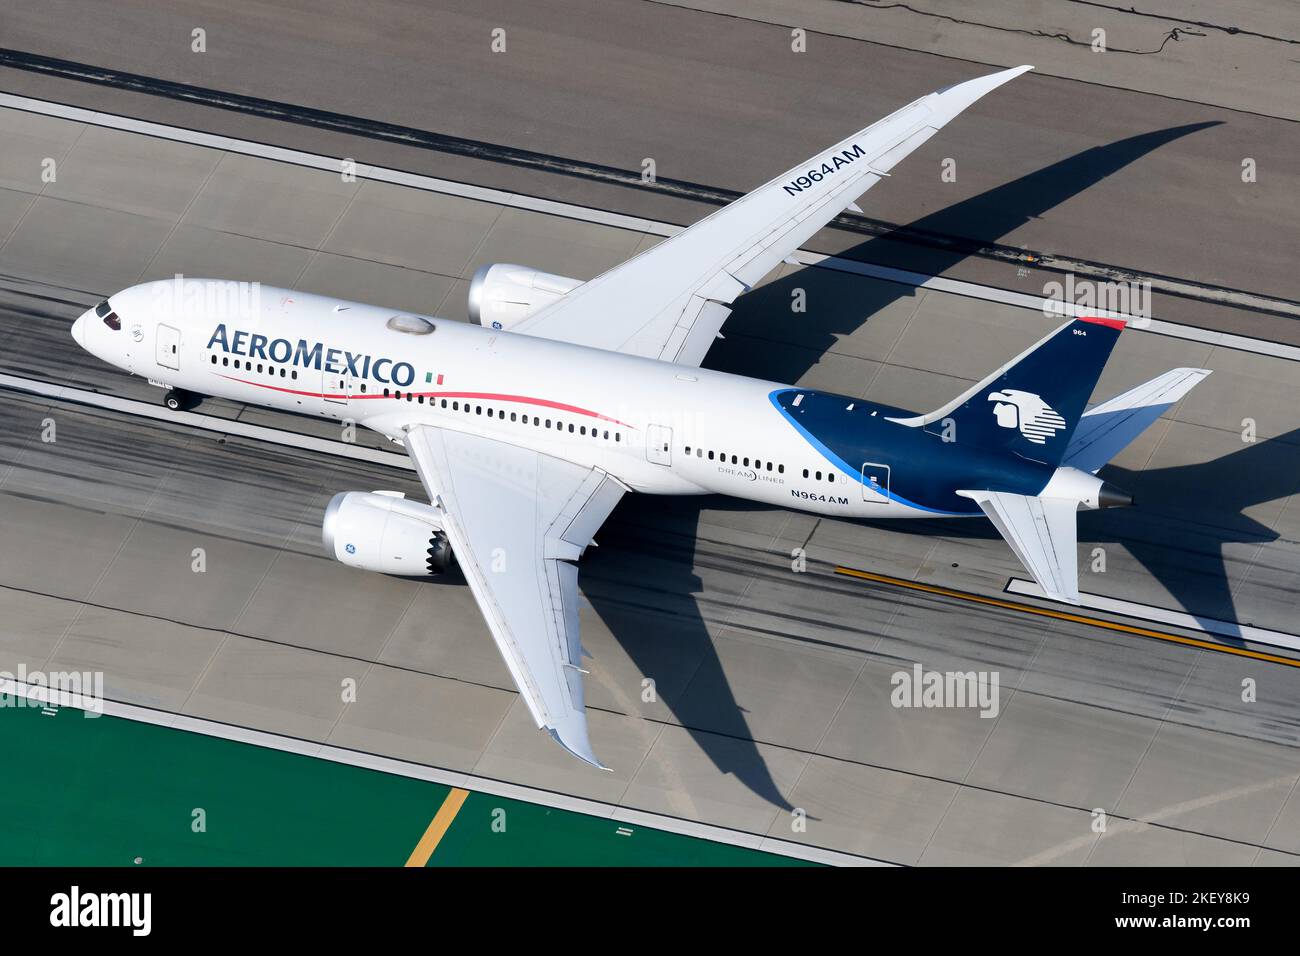 Aeromexico Boeing 787 airplane on runway. Aircraft model 787-8 registered as N964AM belonging to Aeromexico from Mexico, also know as Aero Mexico. Stock Photo